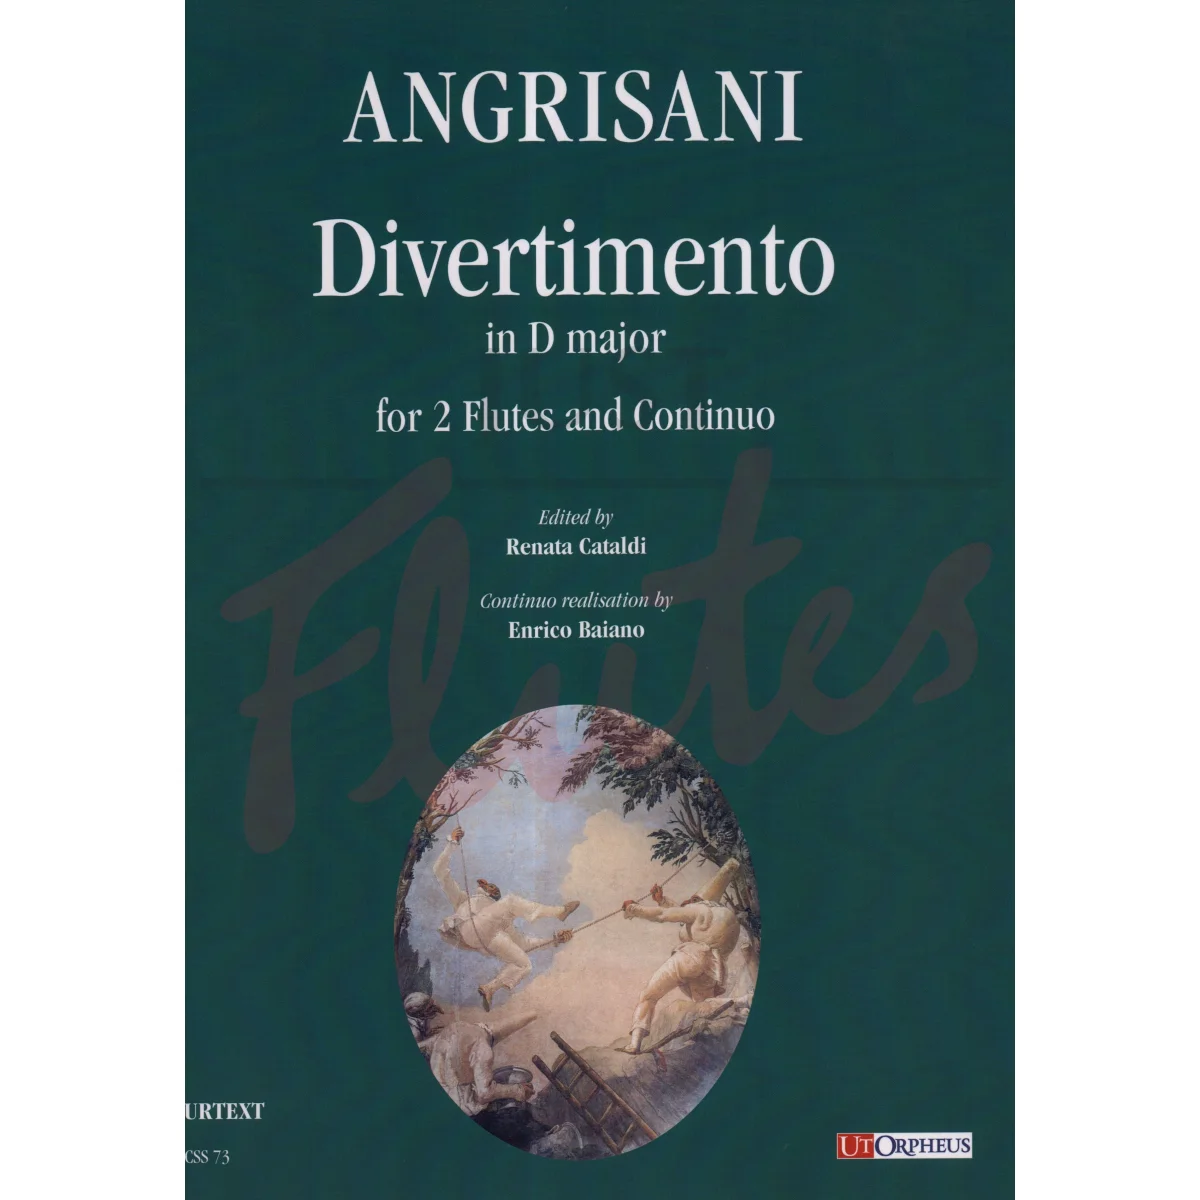 Divertimento in D major for Two Flutes and Continuo